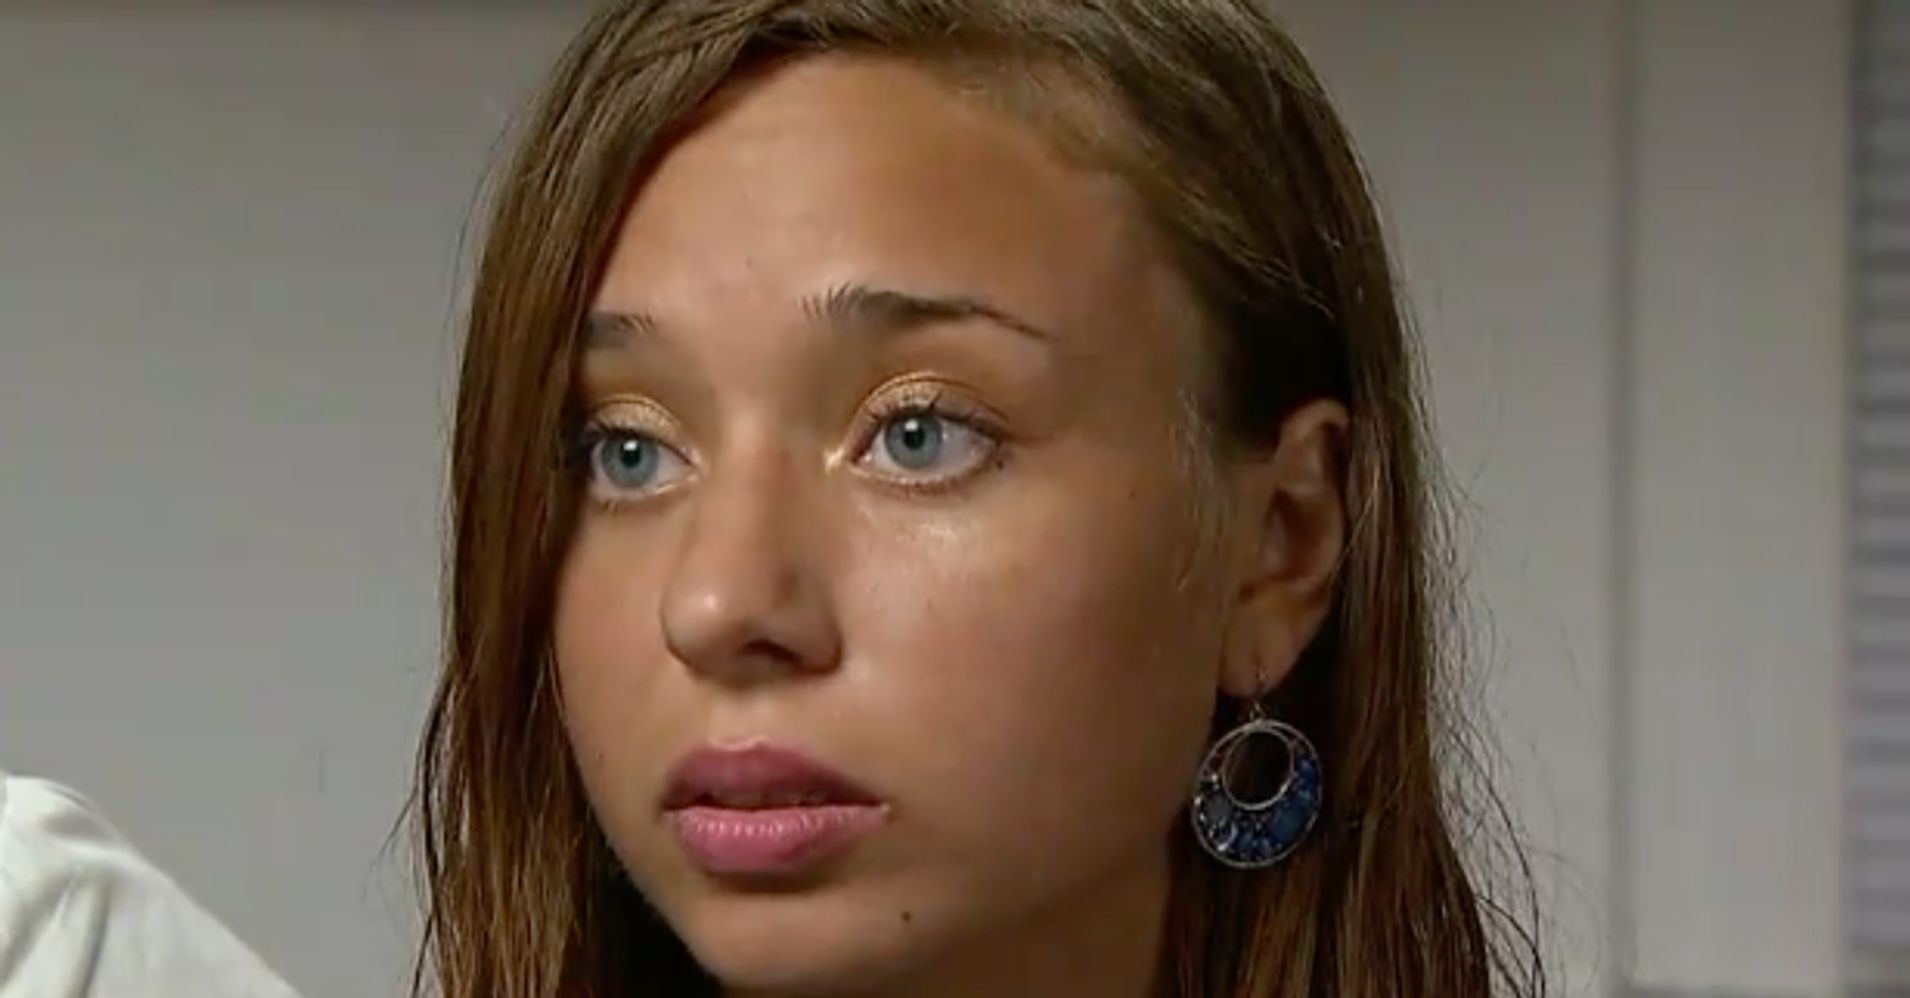 Woman who went missing for 25 days cant explain how she ended up in woods — and family thinks 